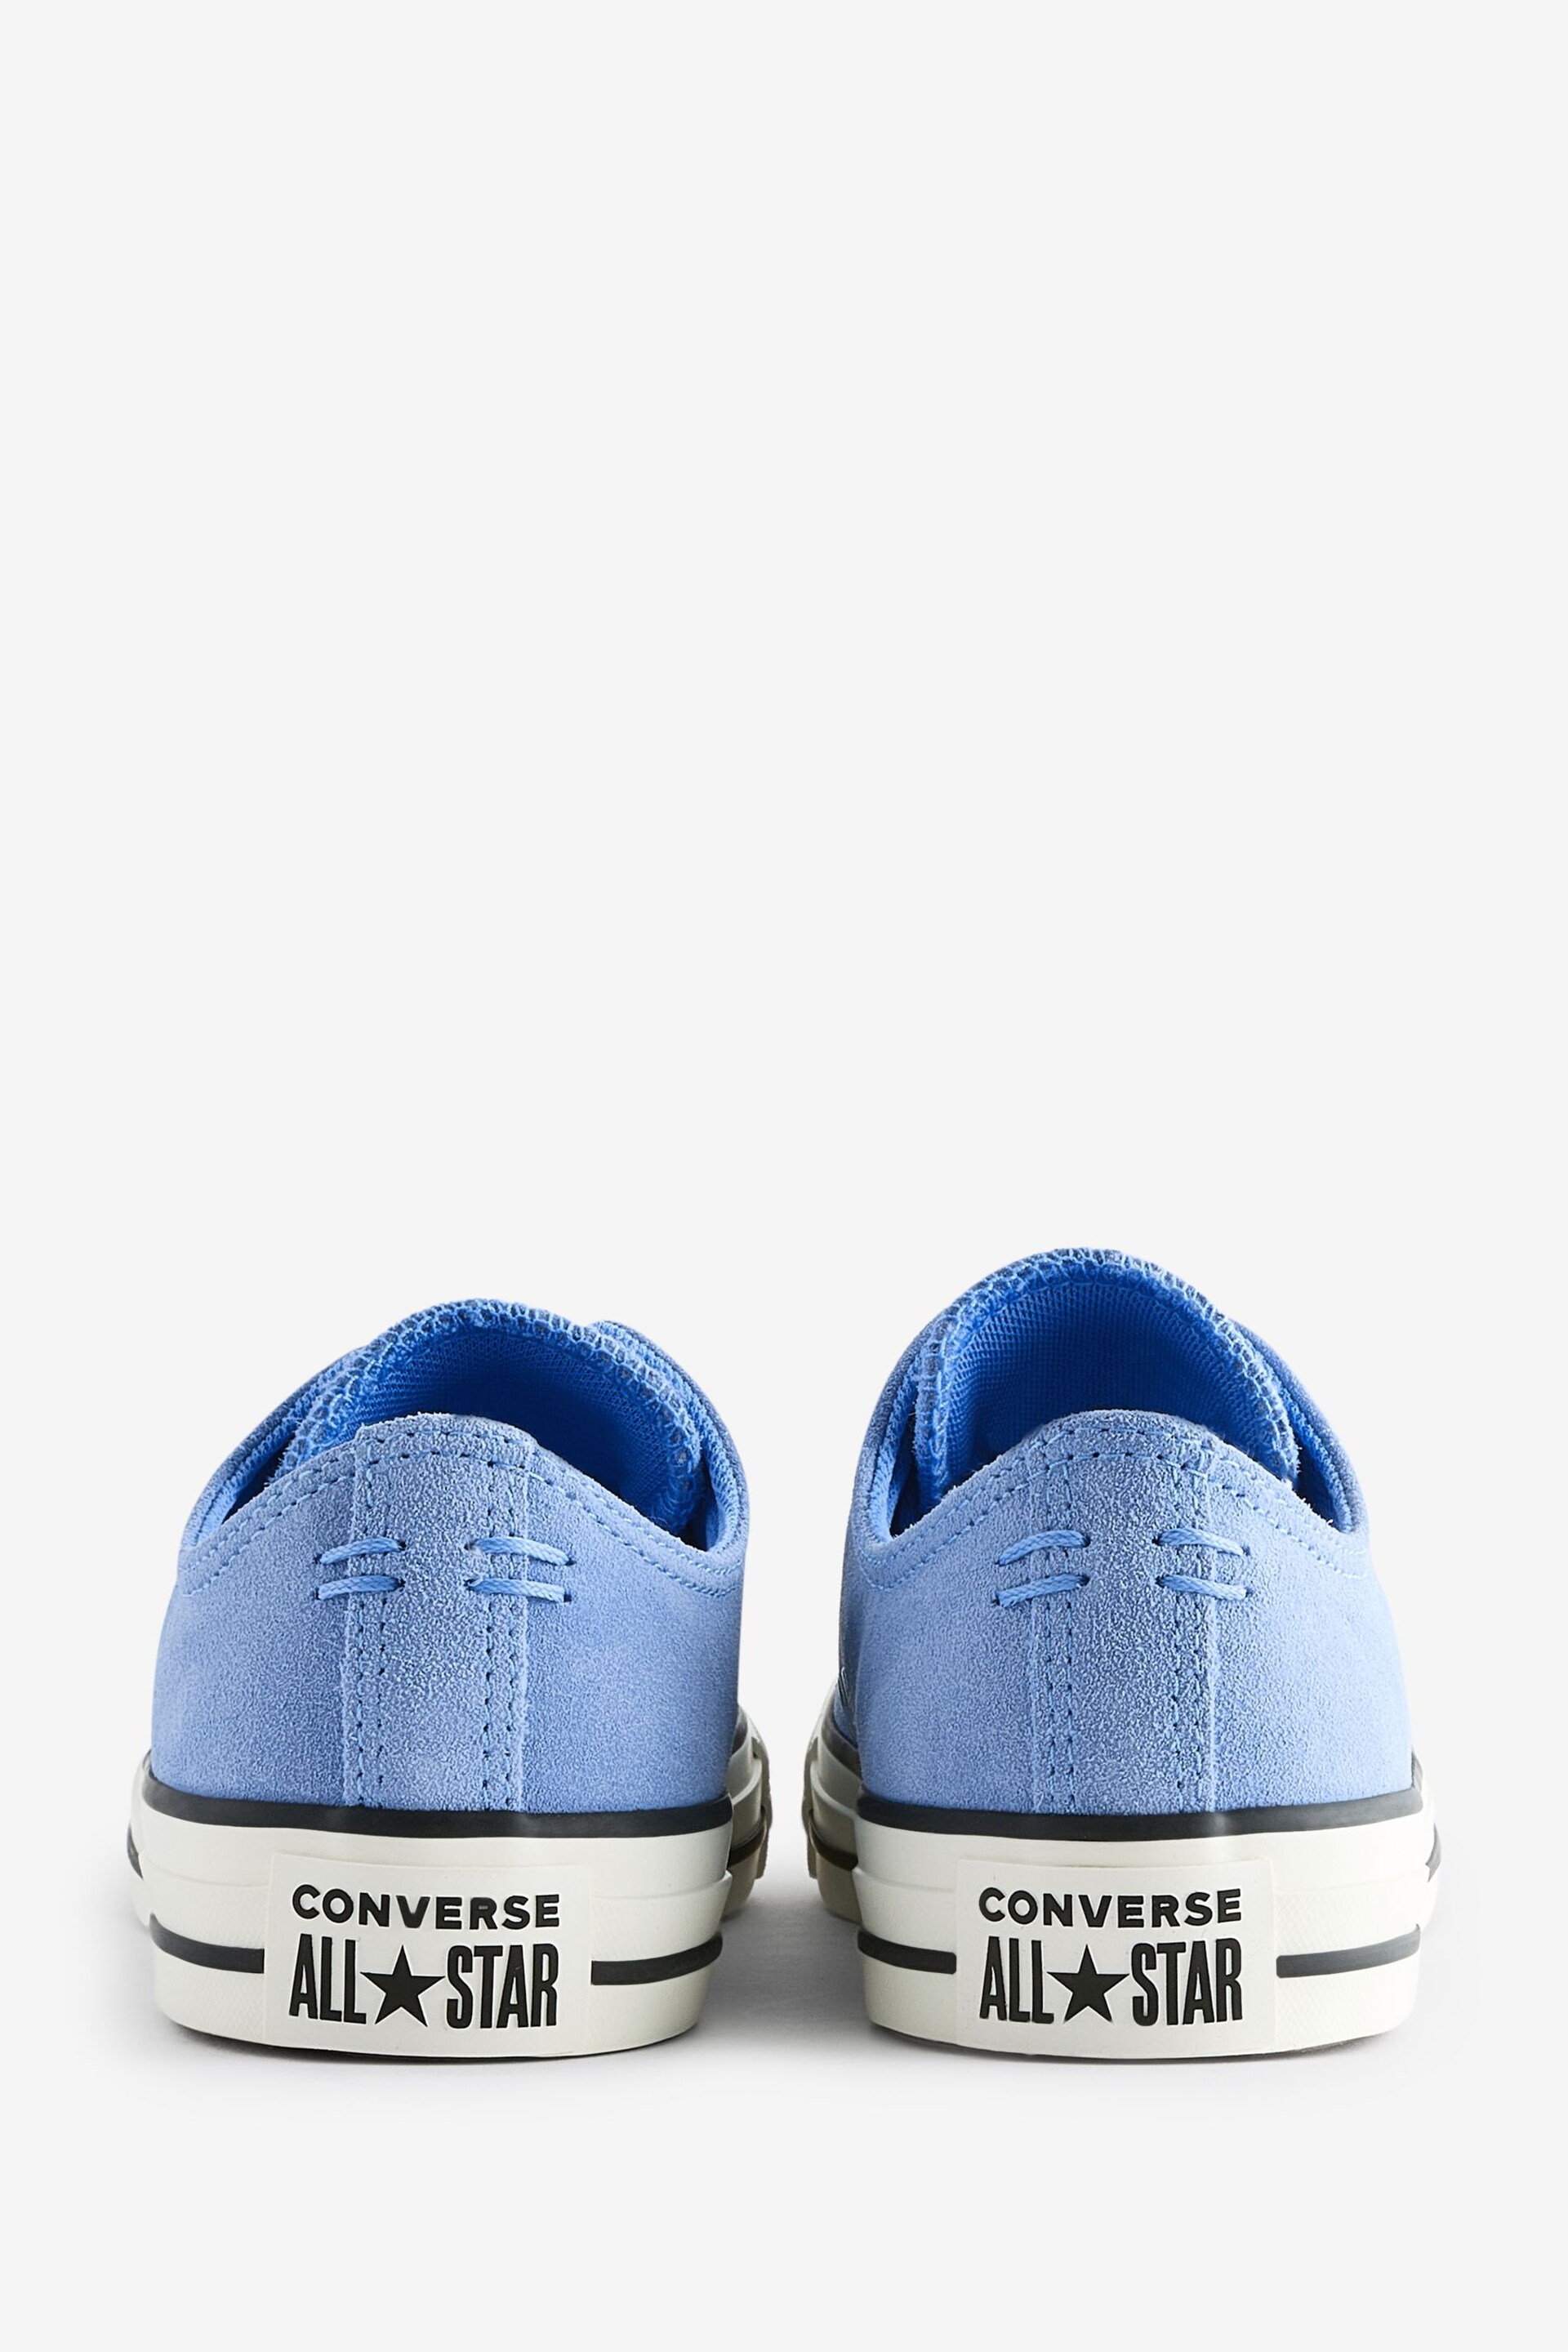 Converse Light Blue Chuck Taylor All Star Suede Ox Trainers - Image 4 of 9